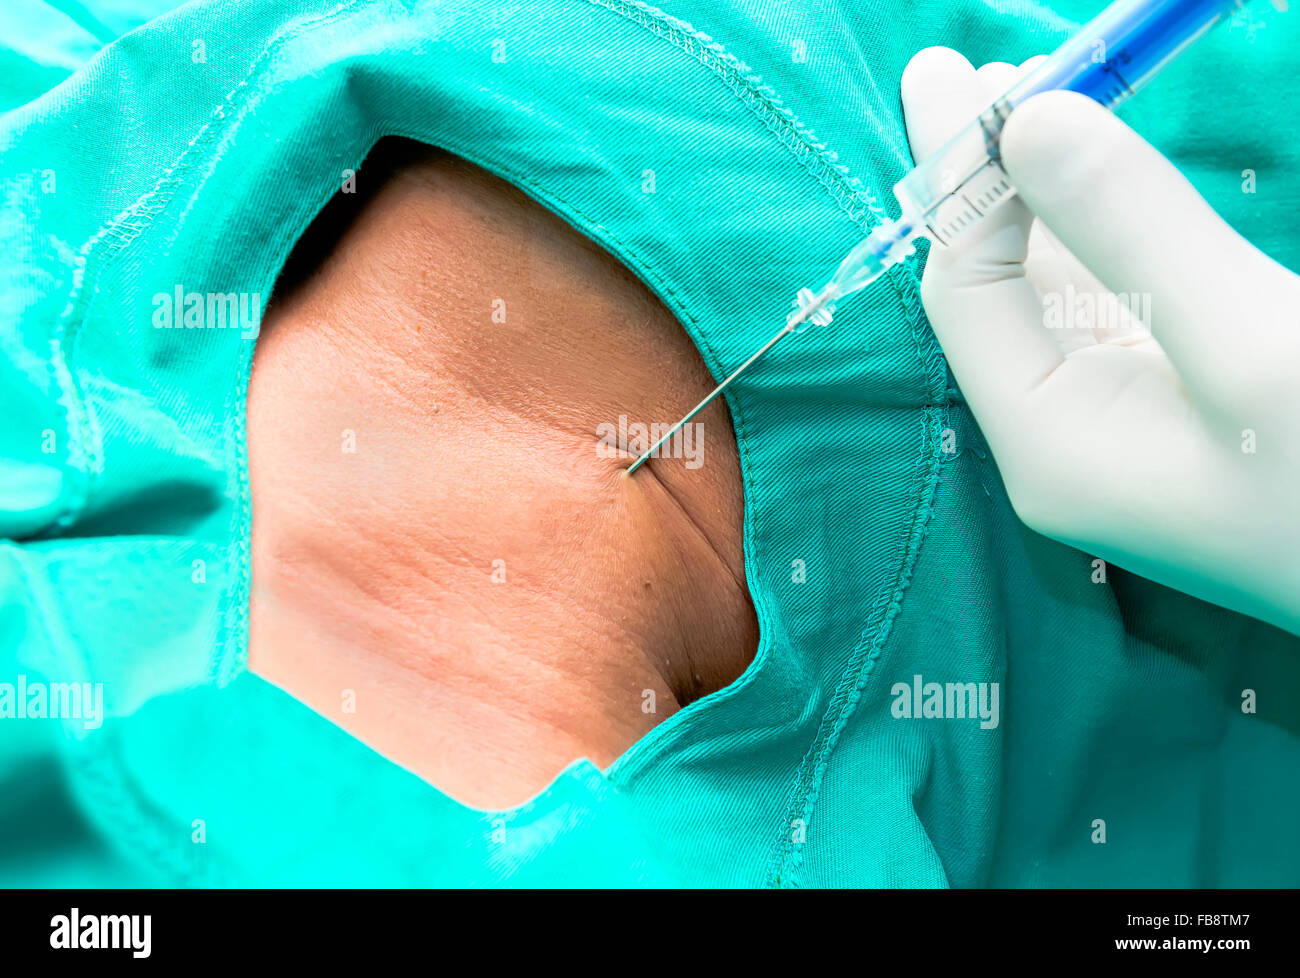 Placement of a central venous catheter Stock Photo